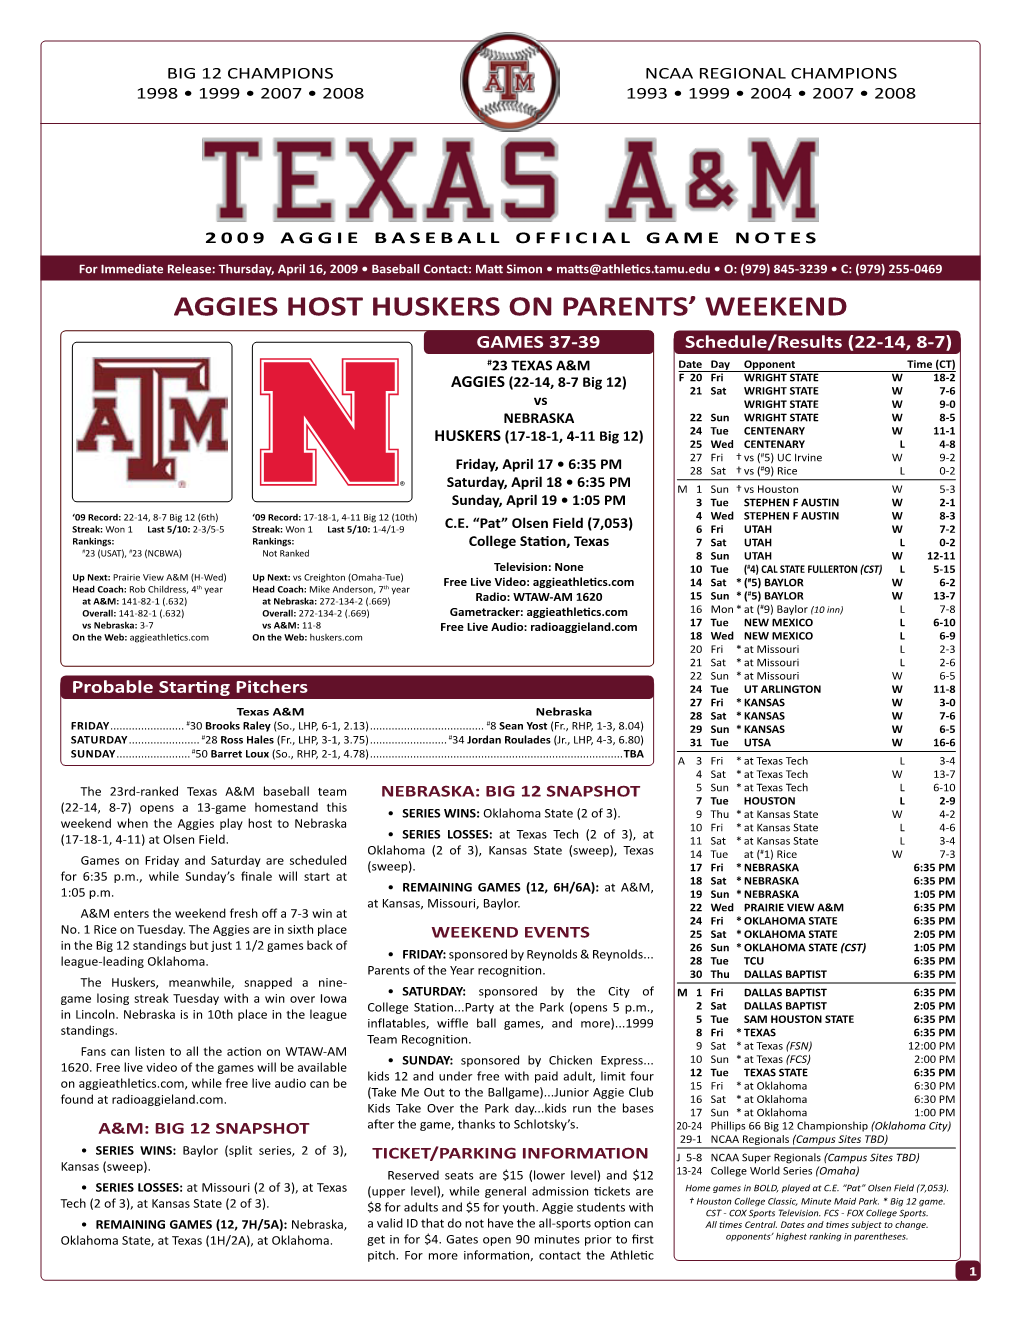 Aggies Host Huskers on Parents' Weekend